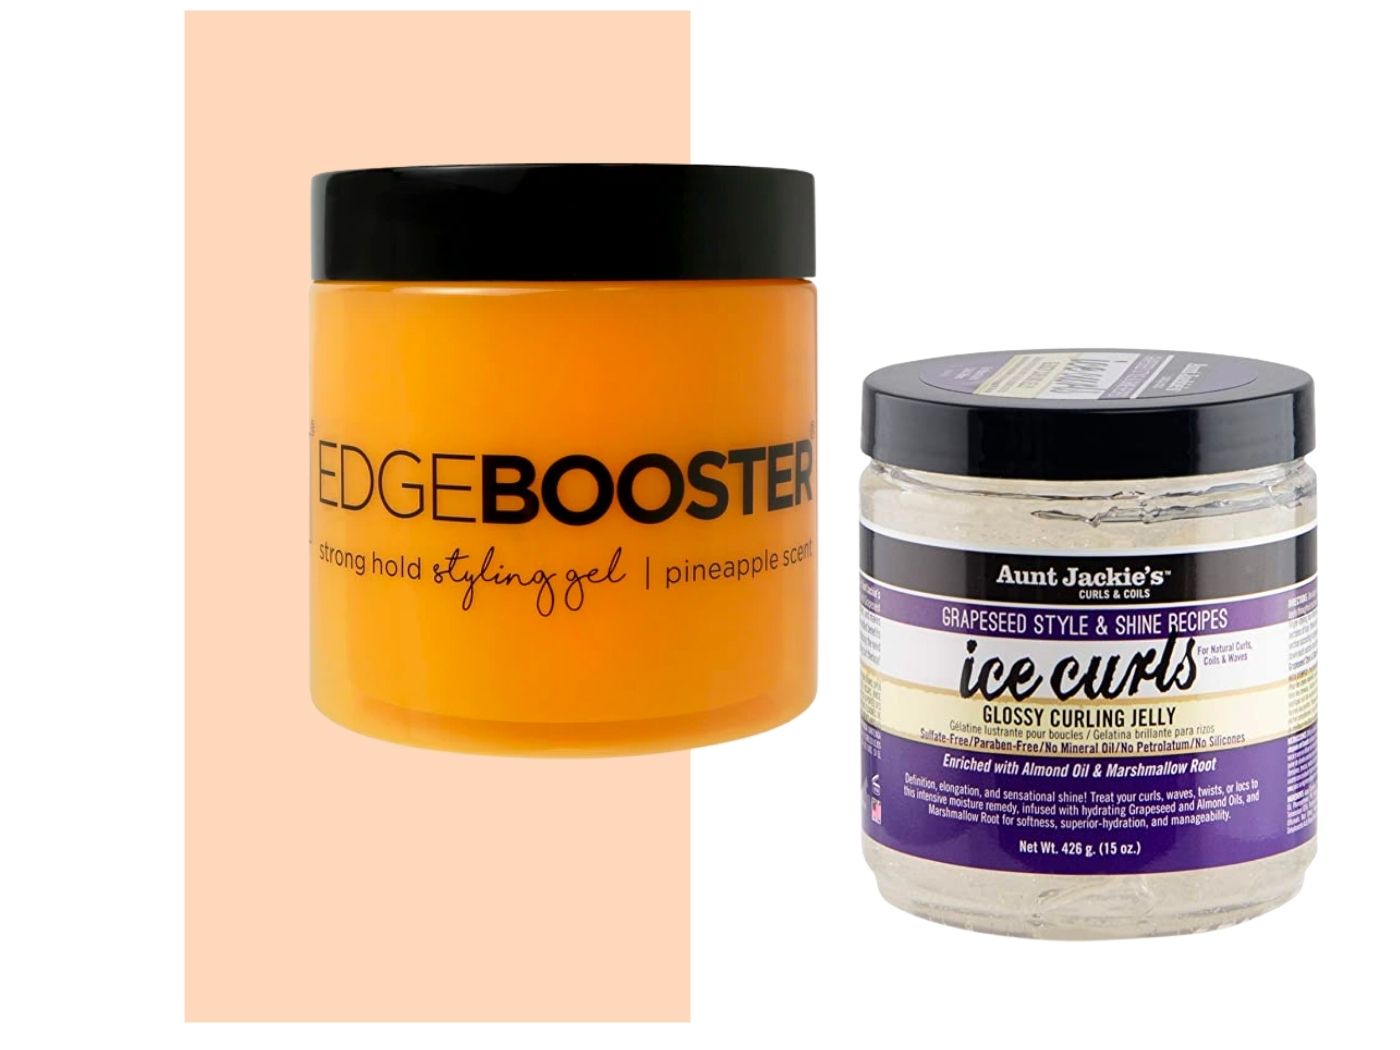 Edge Booster Gel Vs Aunt Jackie's  Ice Curls Glossy Curling Jelly